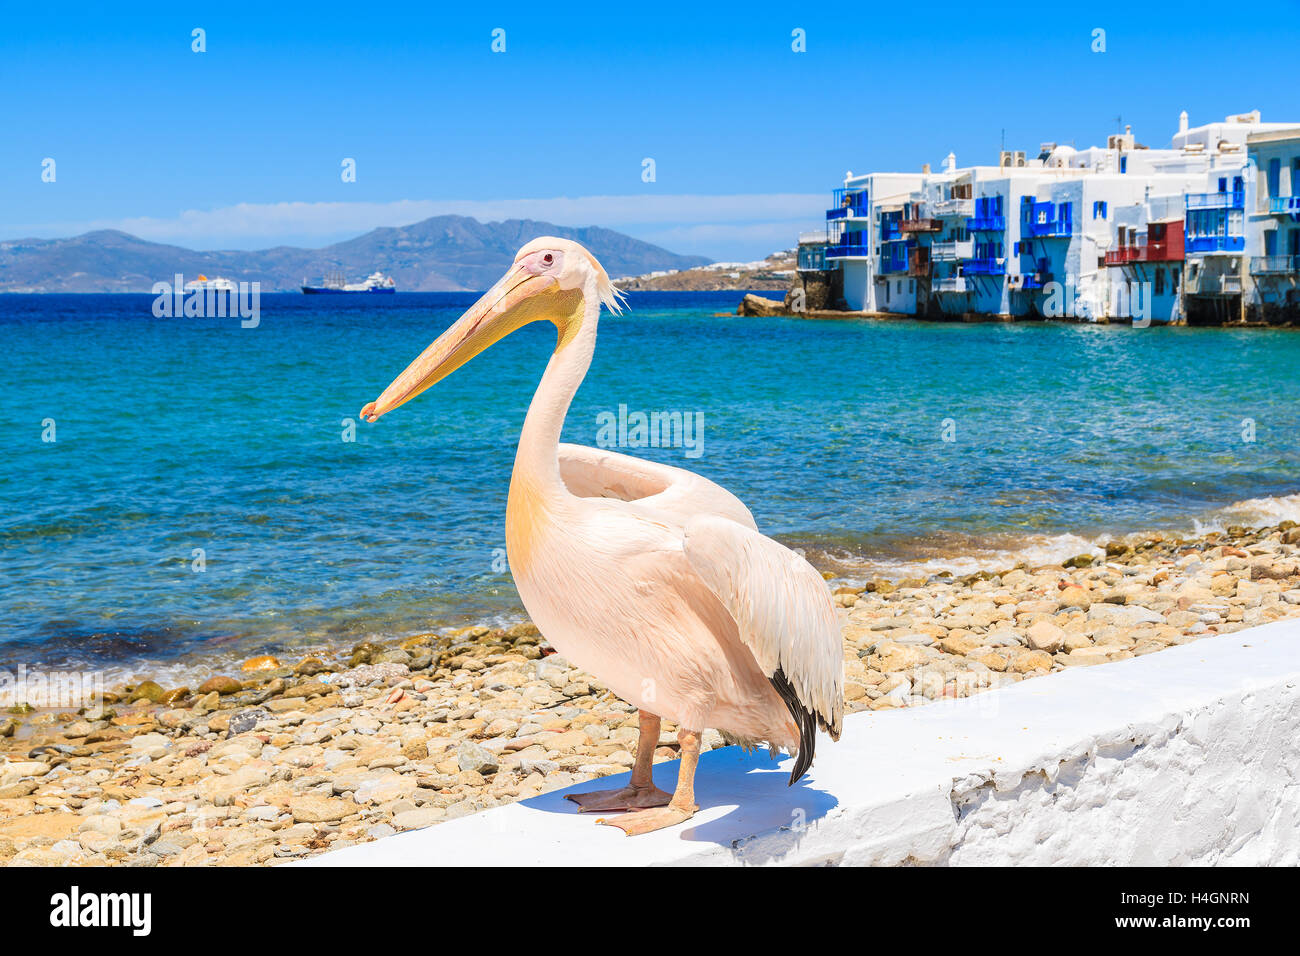 Famous pelican bird posing for photos against beach in Mykonos town, Cyclades islands, Greece Stock Photo